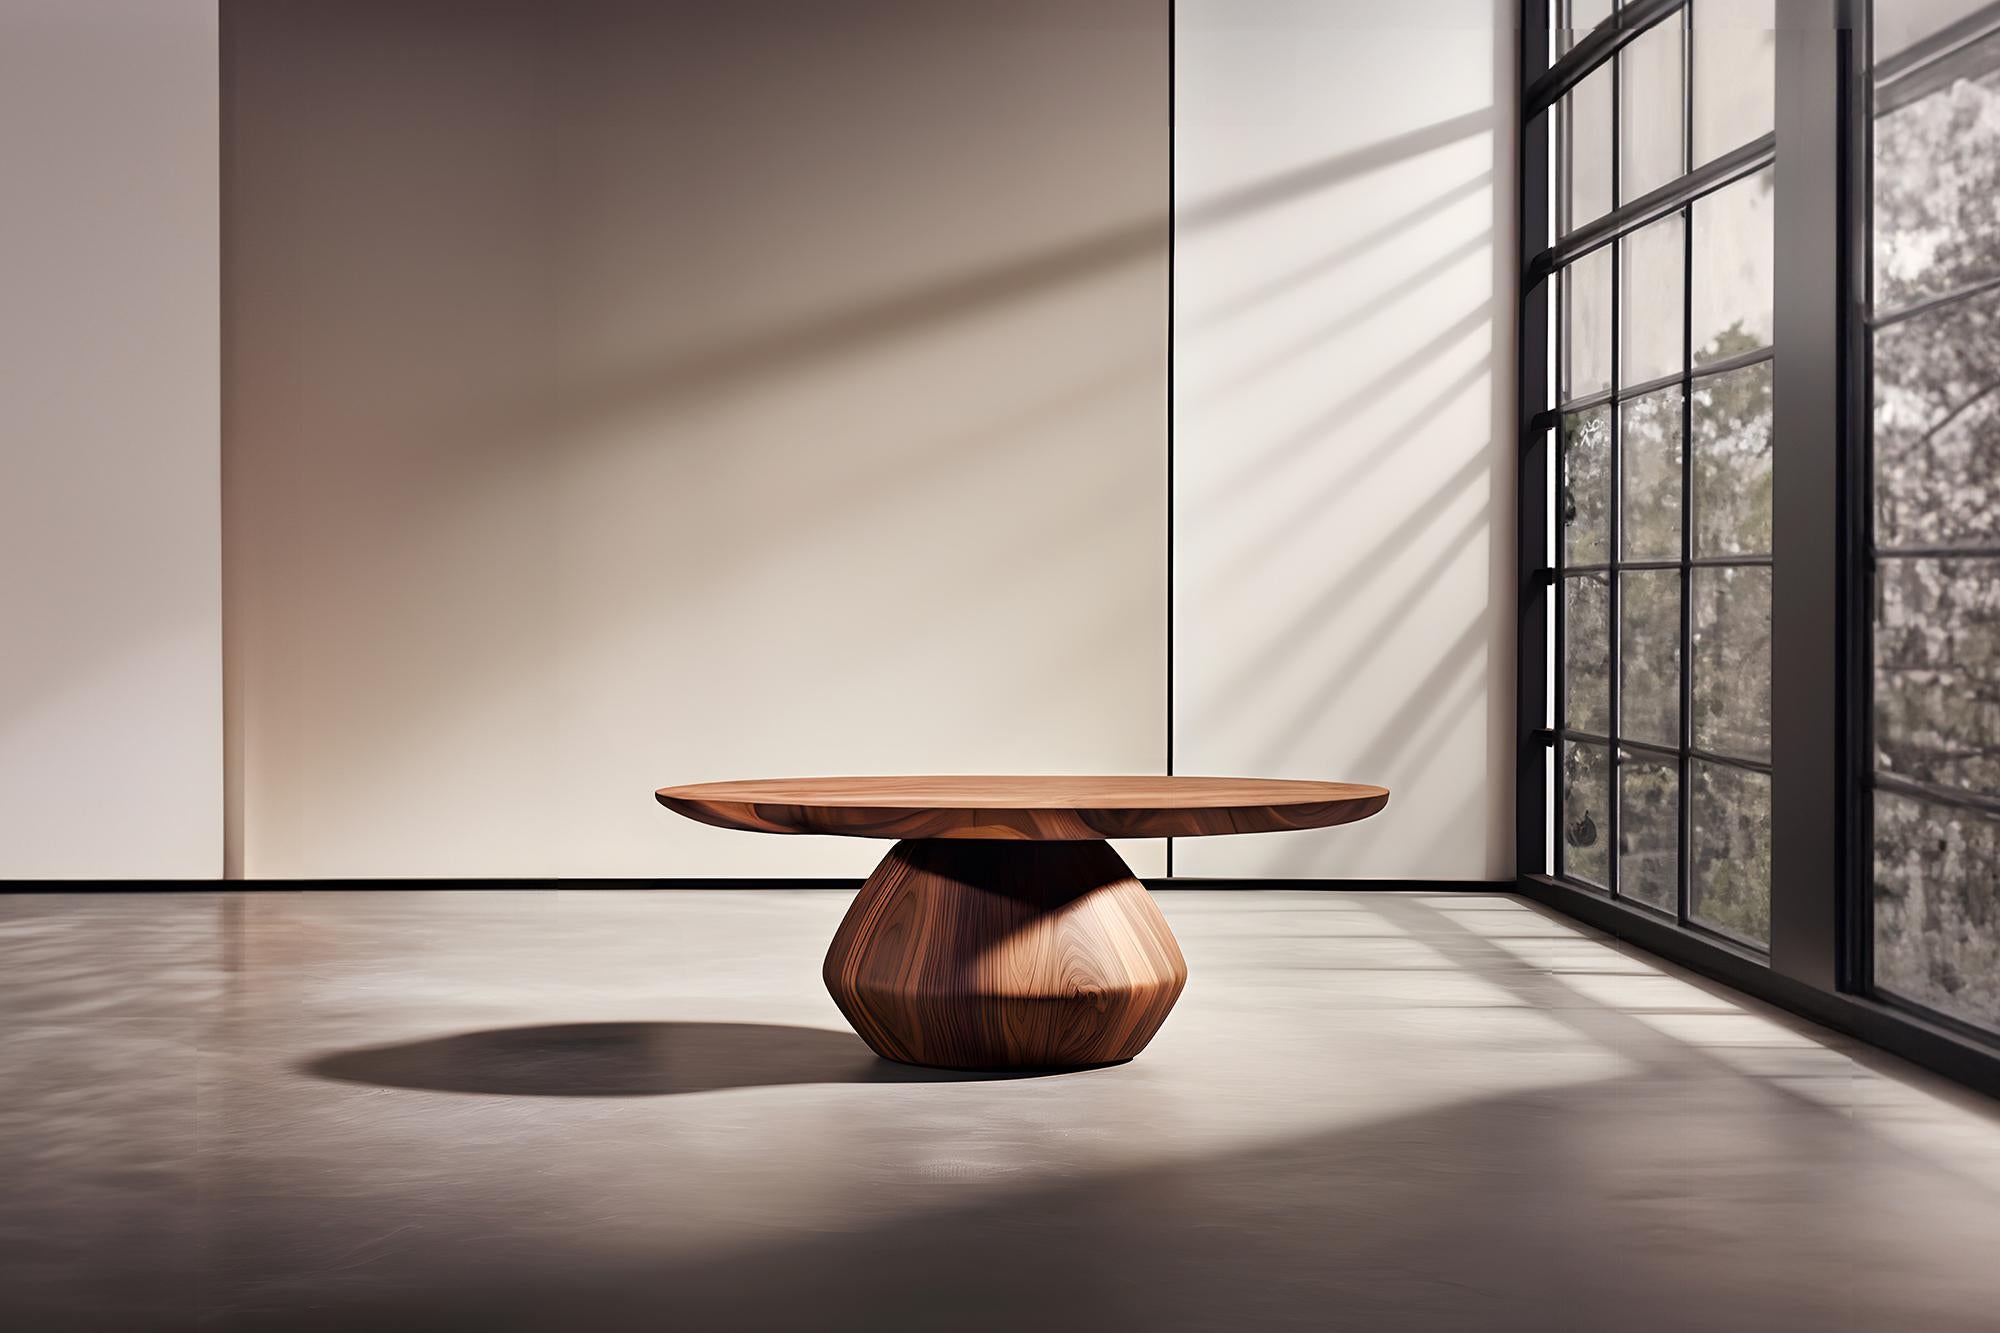 Sculptural Coffee Table Made of Solid Wood, Center Table Solace S42 by Joel Escalona


The Solace table series, designed by Joel Escalona, is a furniture collection that exudes balance and presence, thanks to its sensuous, dense, and irregular